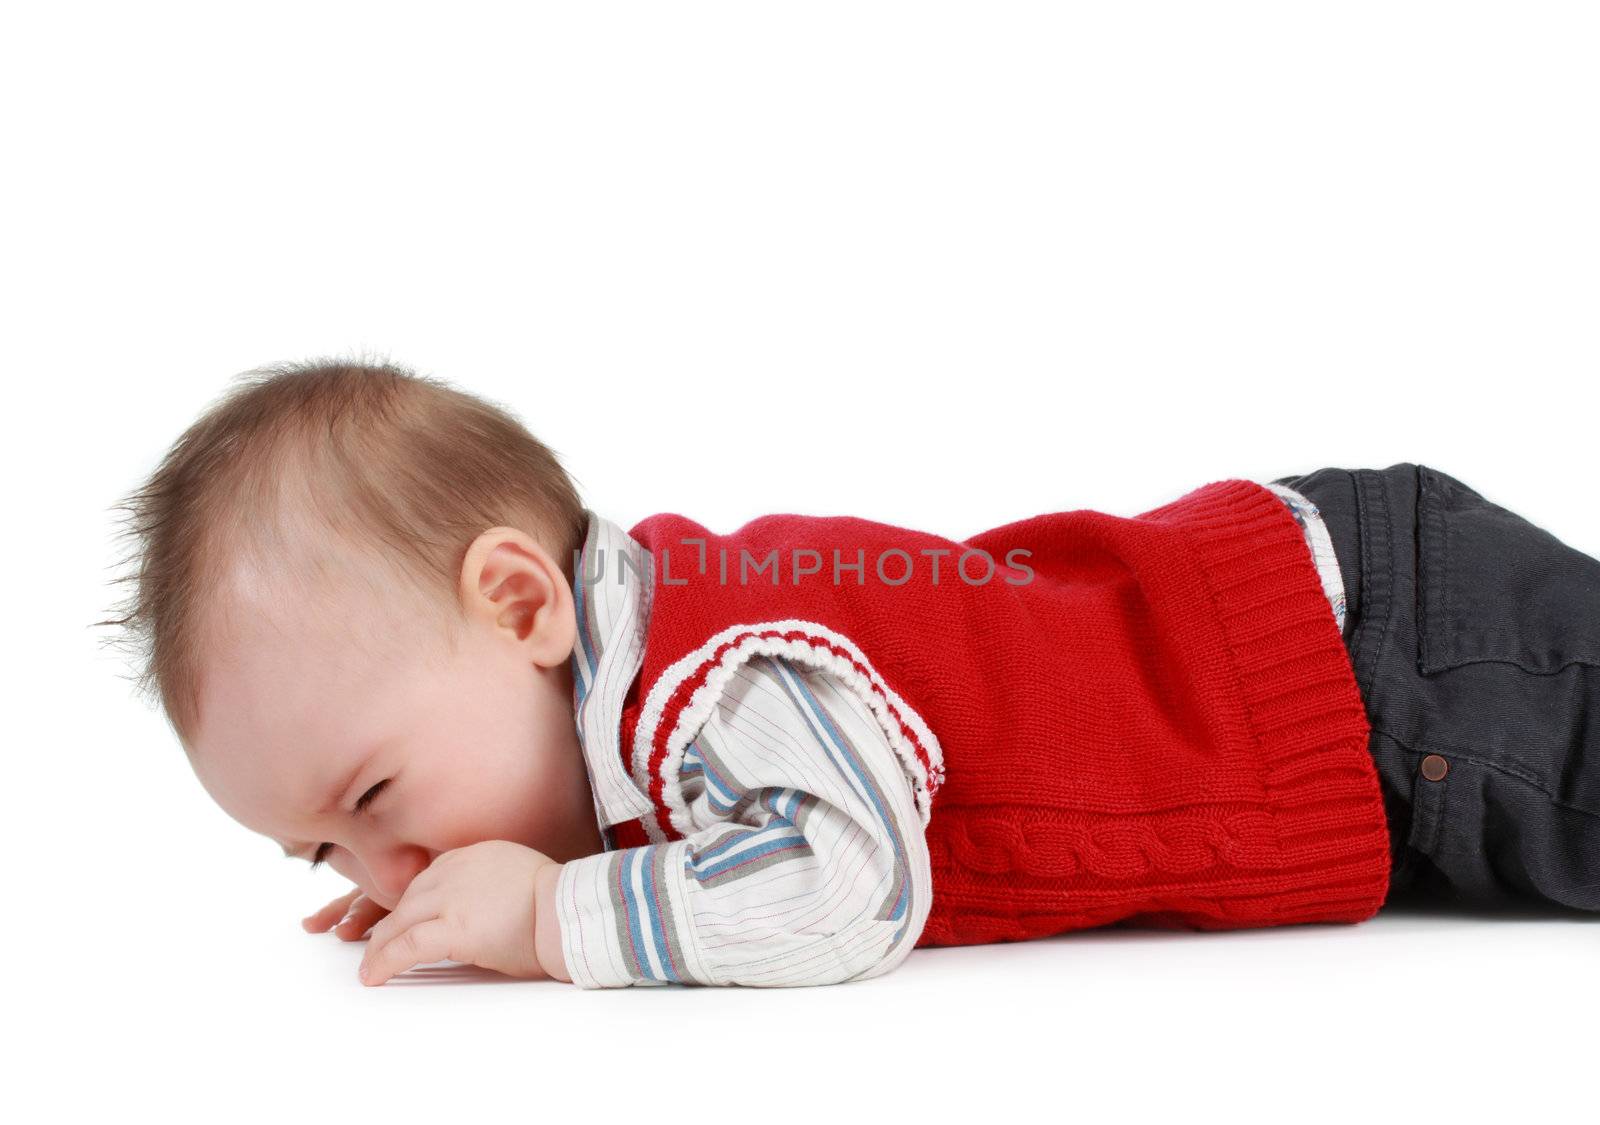 8 months cacasian baby boy crying, white background